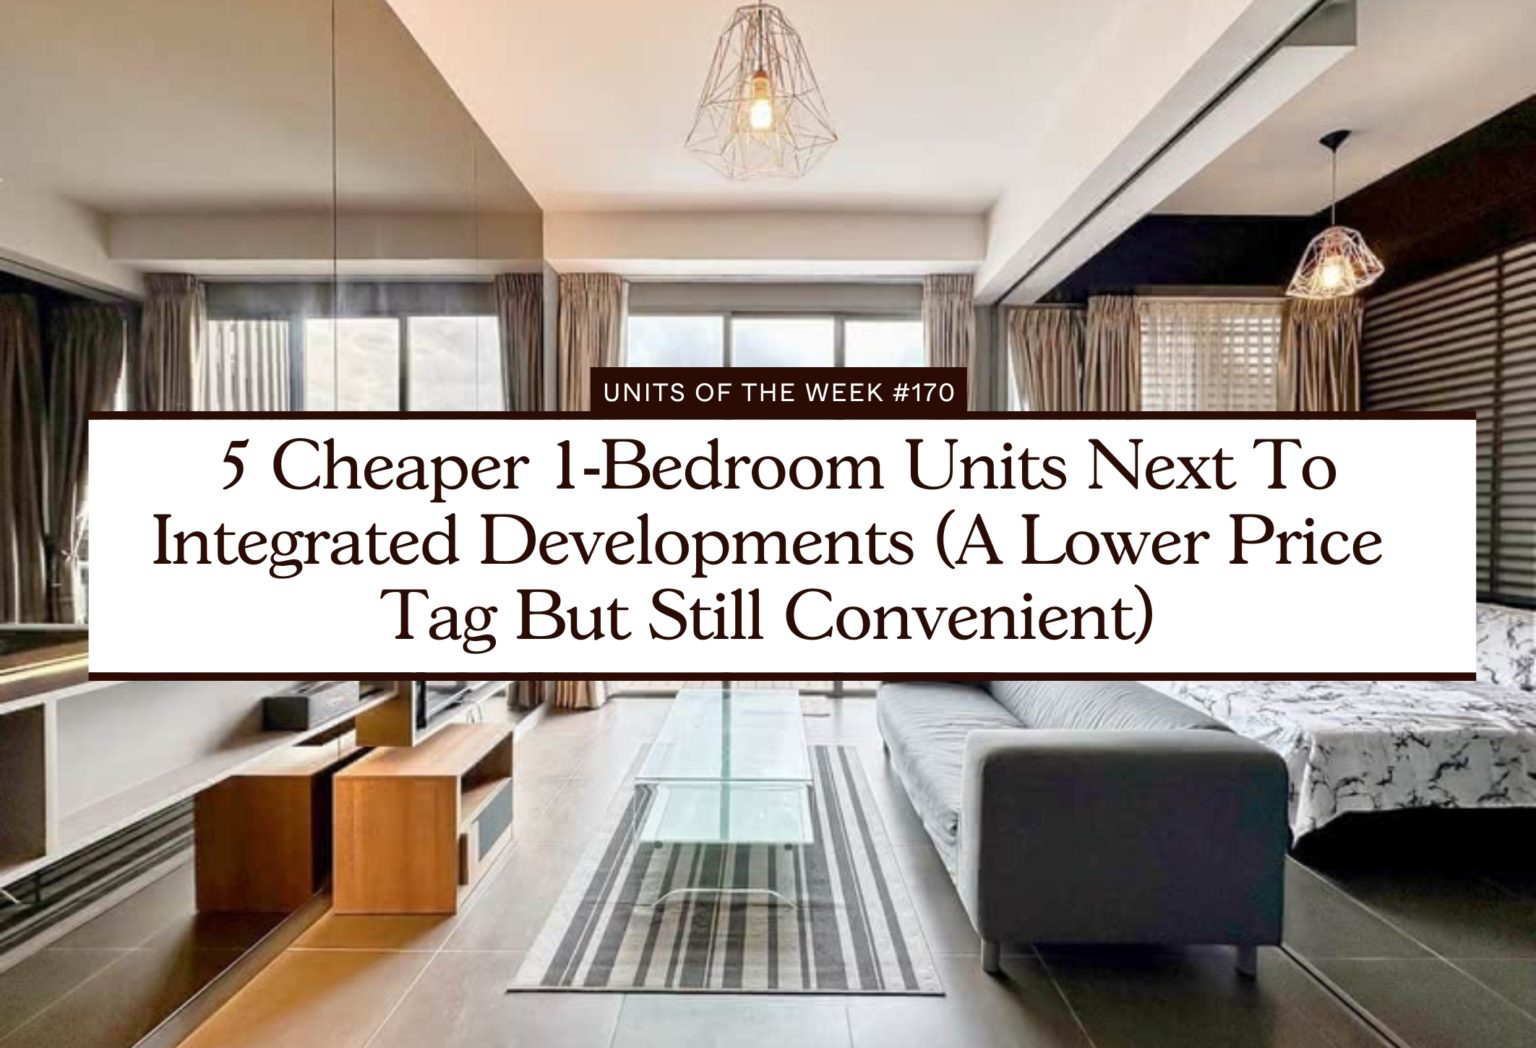 5 Cheaper 1 Bedroom Units Next To Integrated Developments (A Lower Price Tag But Still Convenient)